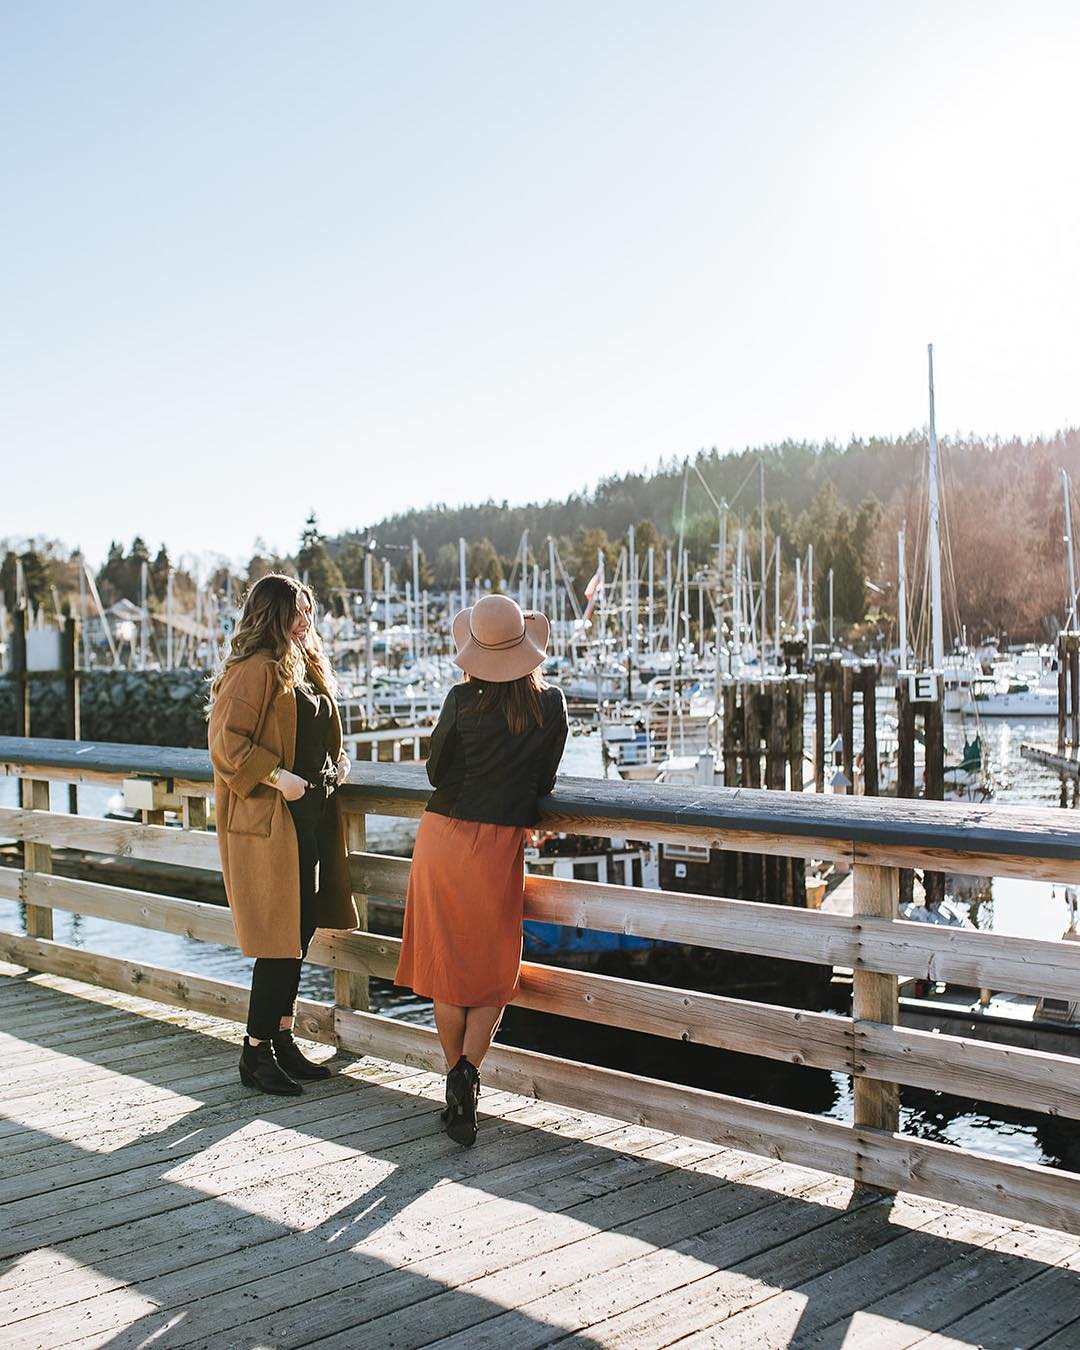 Two people stand on a pier looking out at the boats in the harbour at Gibsons Marina on a sunny day.